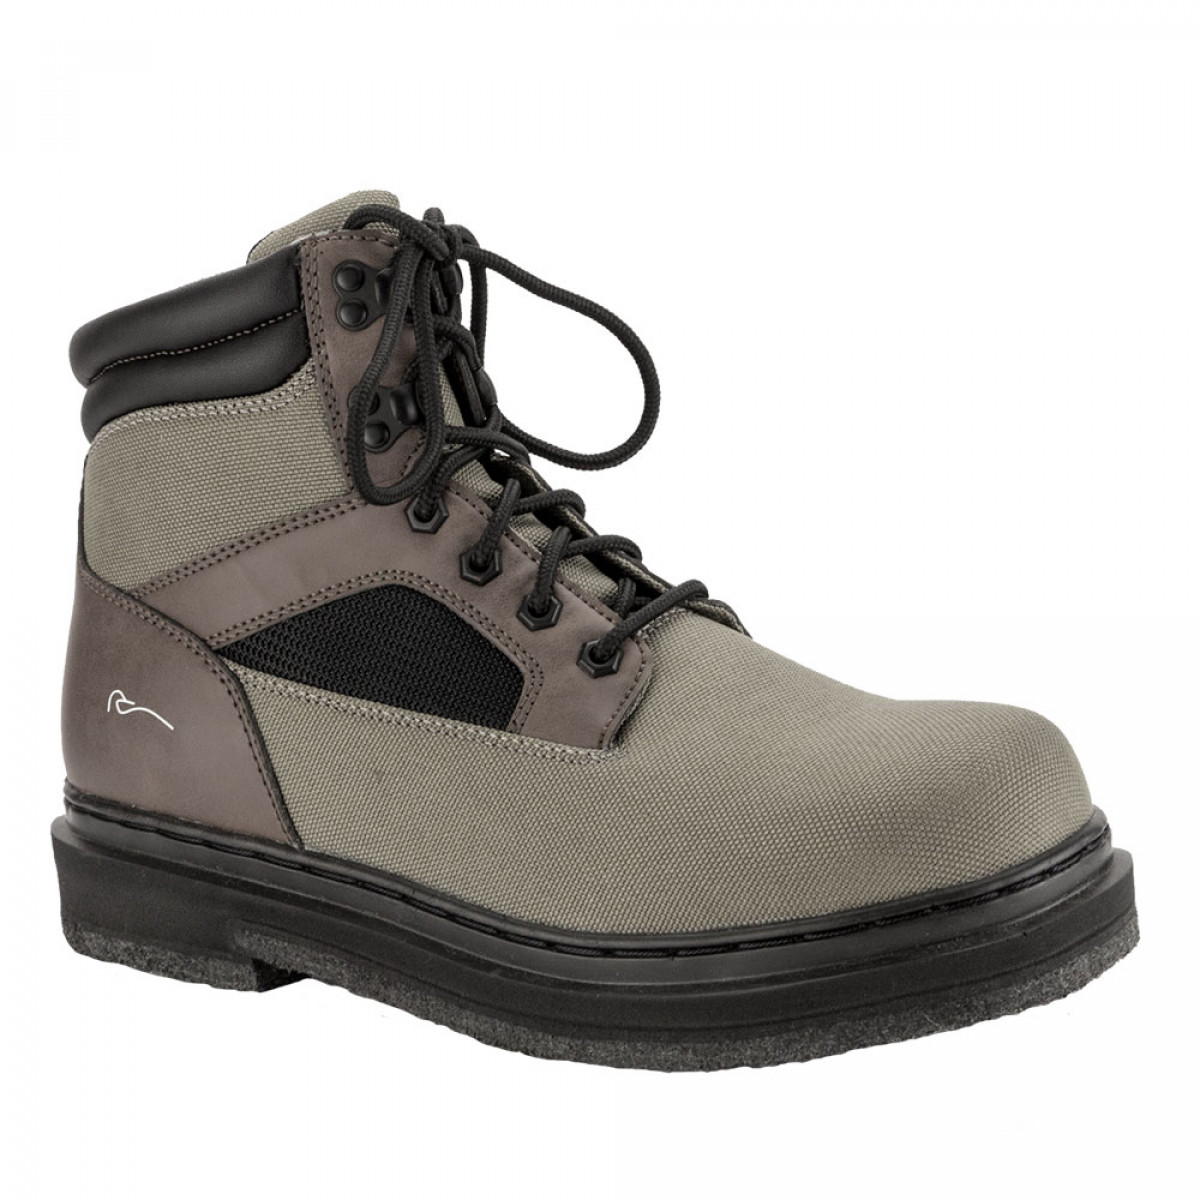 Tremont Wading Boot